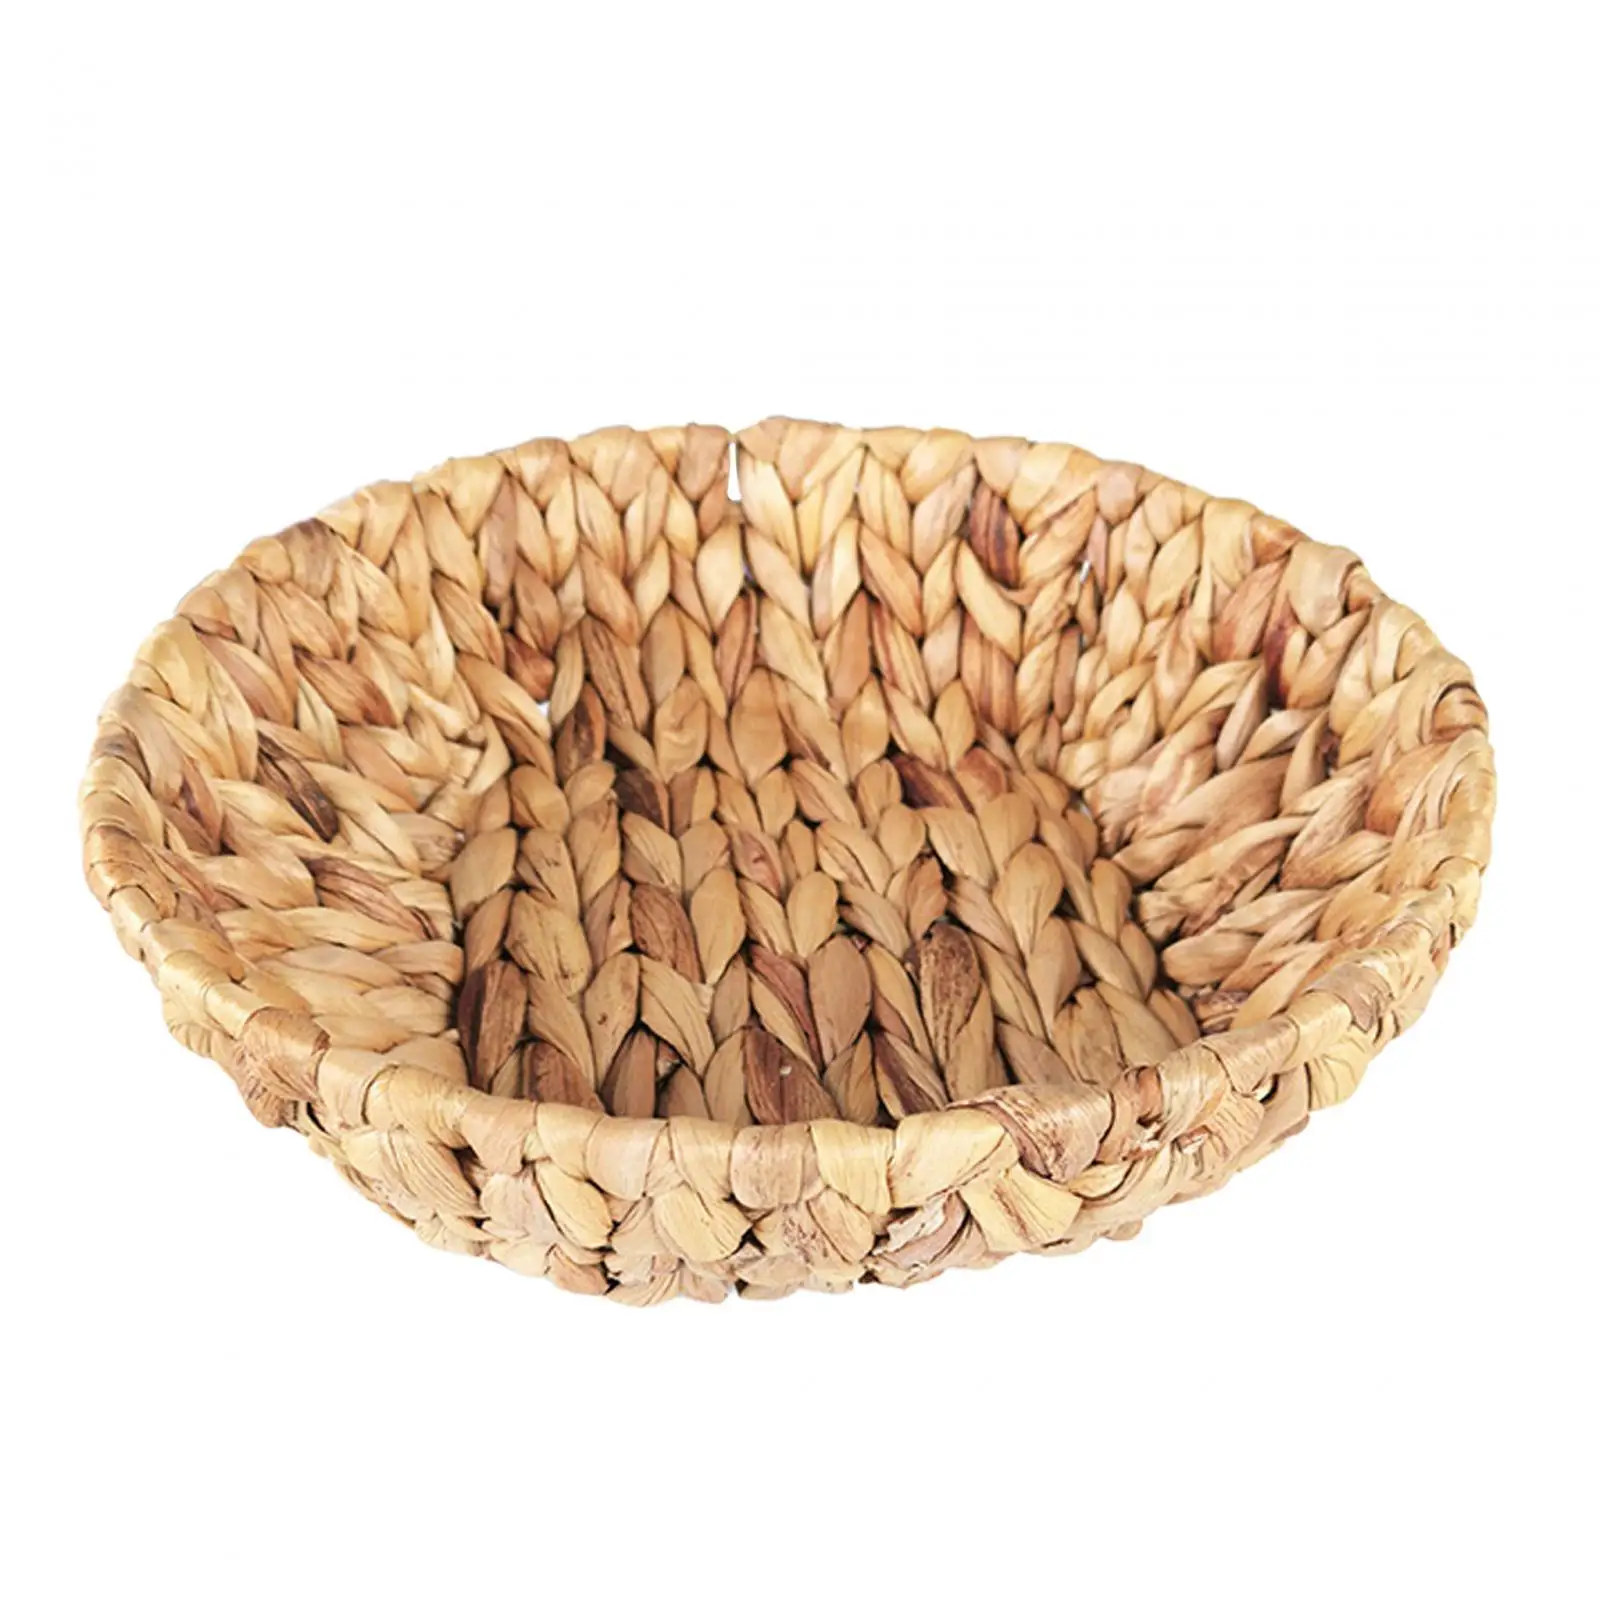 Grass Weaving Tray Wicker Serving Tray Snack Candy Storage Basket Woven Seagrass Tray for Coffee Table Bread